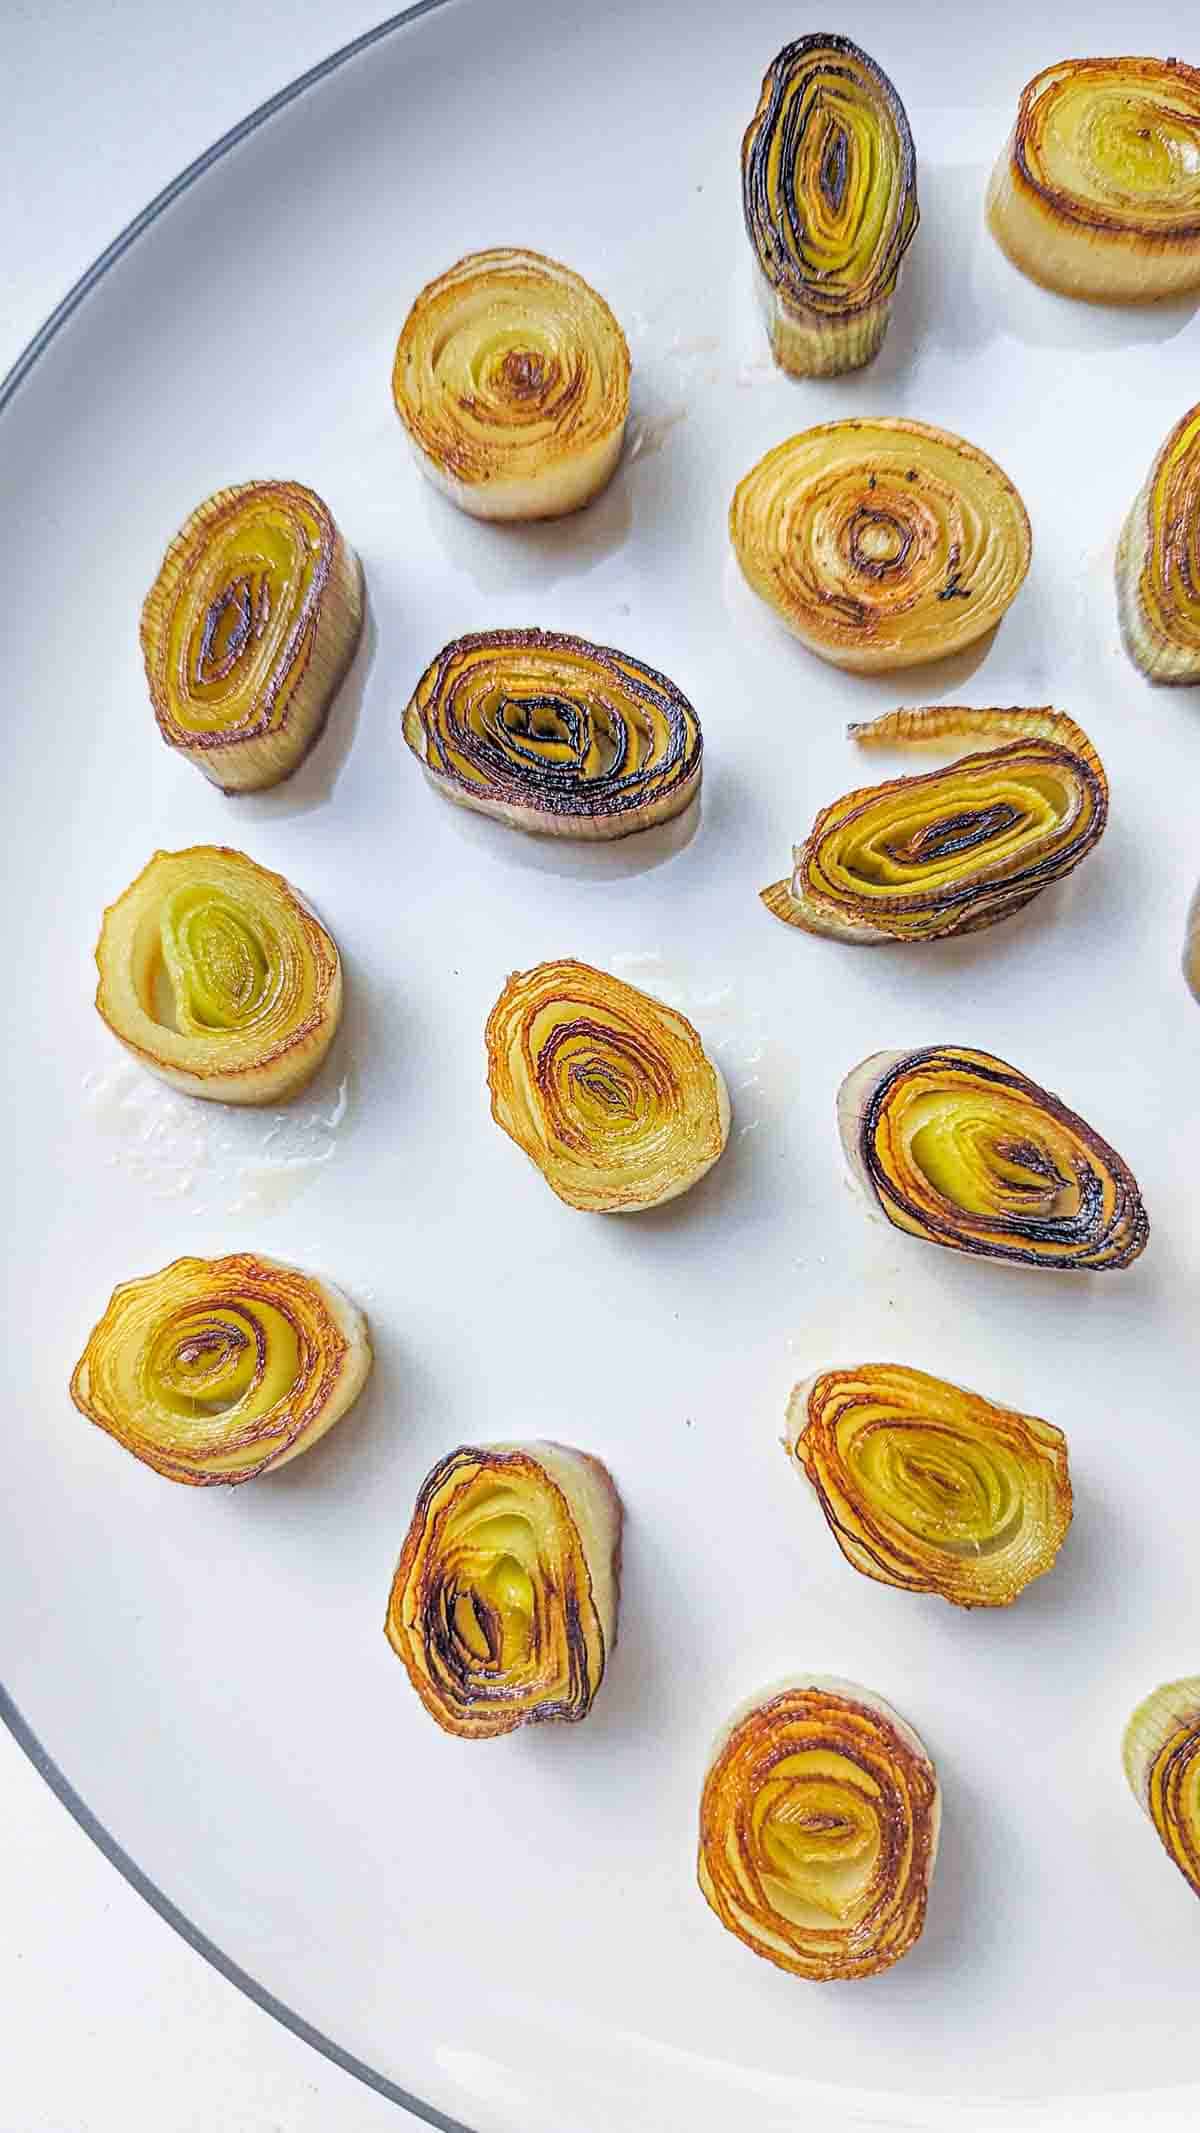 leek medallions roasted to a golden color laid out in a plate